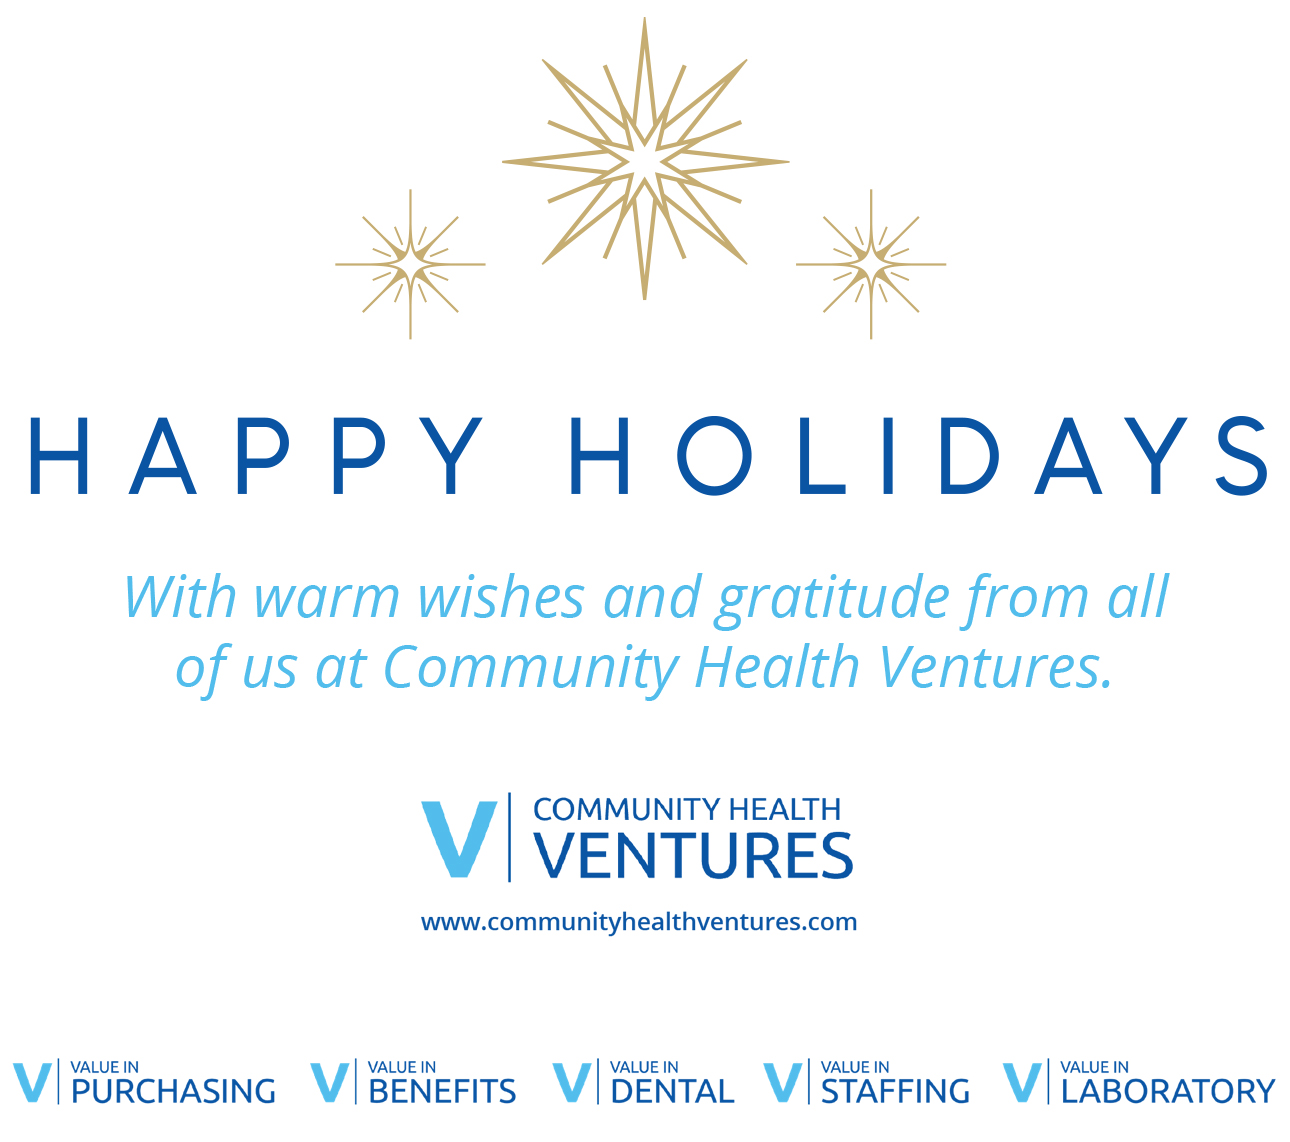 The team at Community Health Ventures wishes you peace, joy and prosperity throughout the coming year. Thank you for your continued support and partnership. We look forward to working with you in the years to come.